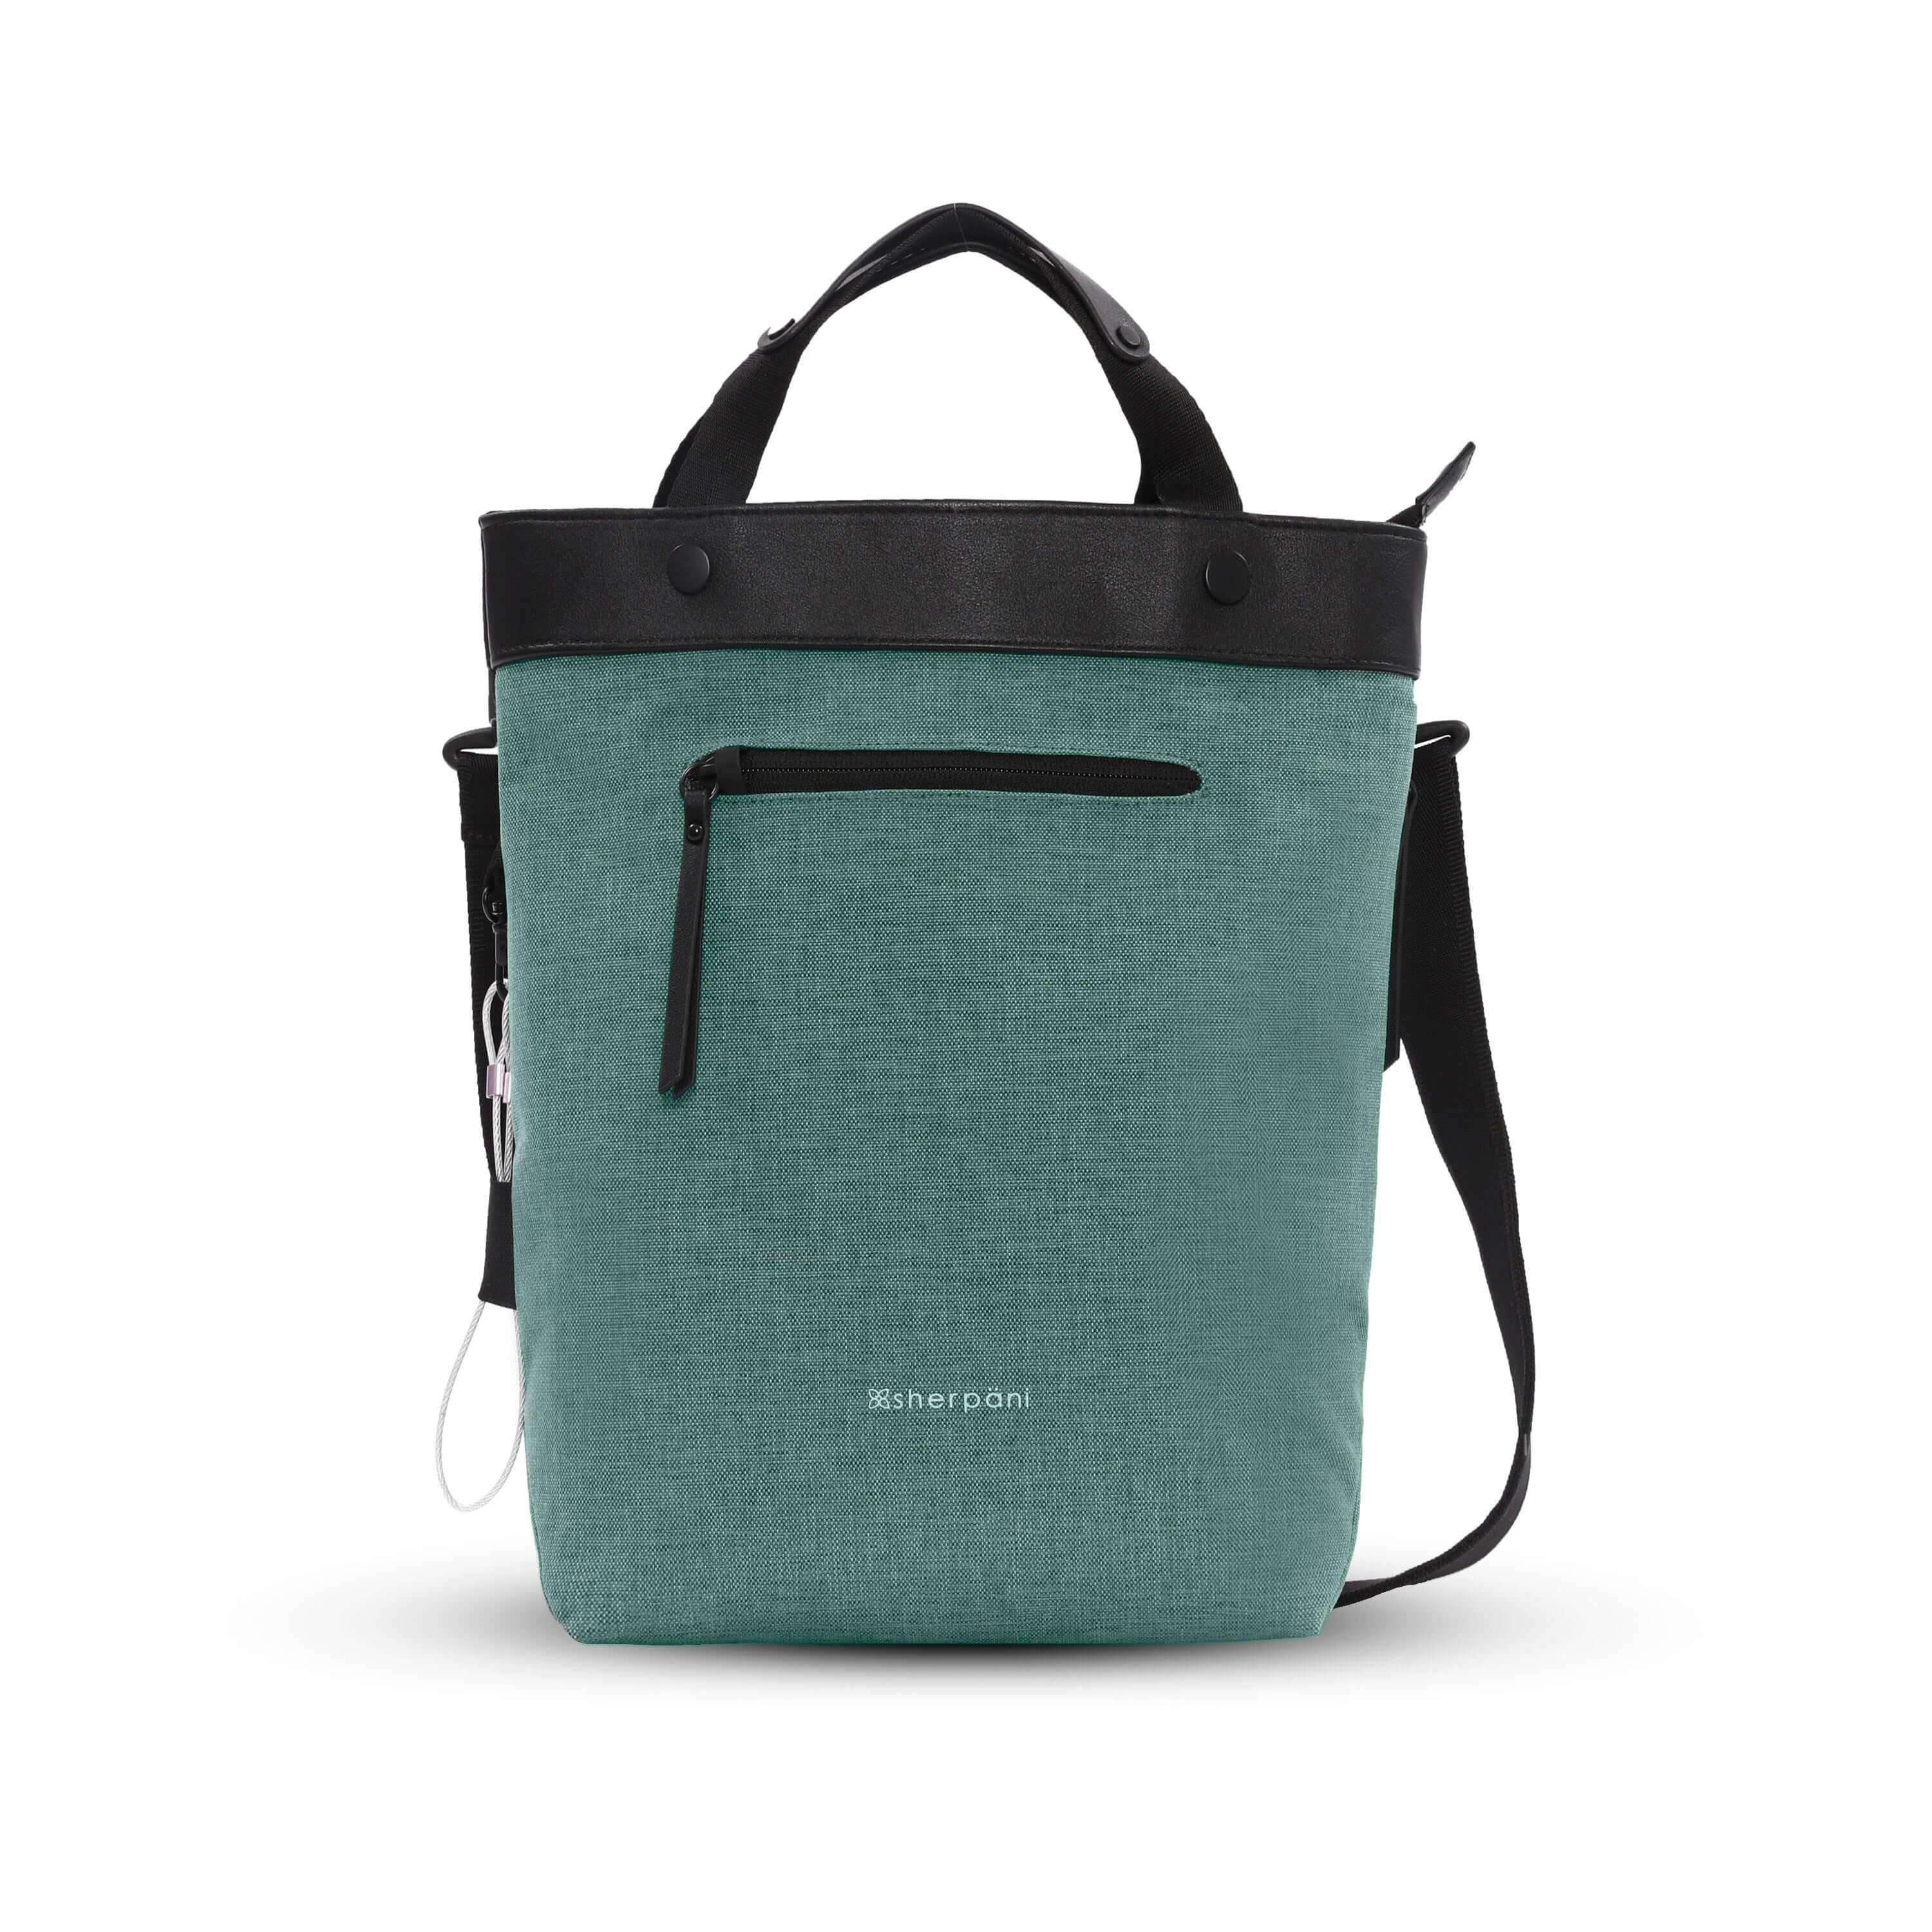 Flat front view of Sherpani&#39;s Anti-Theft bag, the Geo AT in Teal, with vegan leather accents in black. The bag features short tote handles and an adjustable/detachable crossbody strap. There is a locking zipper compartment on the front. A chair loop lock is clipped to the side and secured in place by an elastic tab.